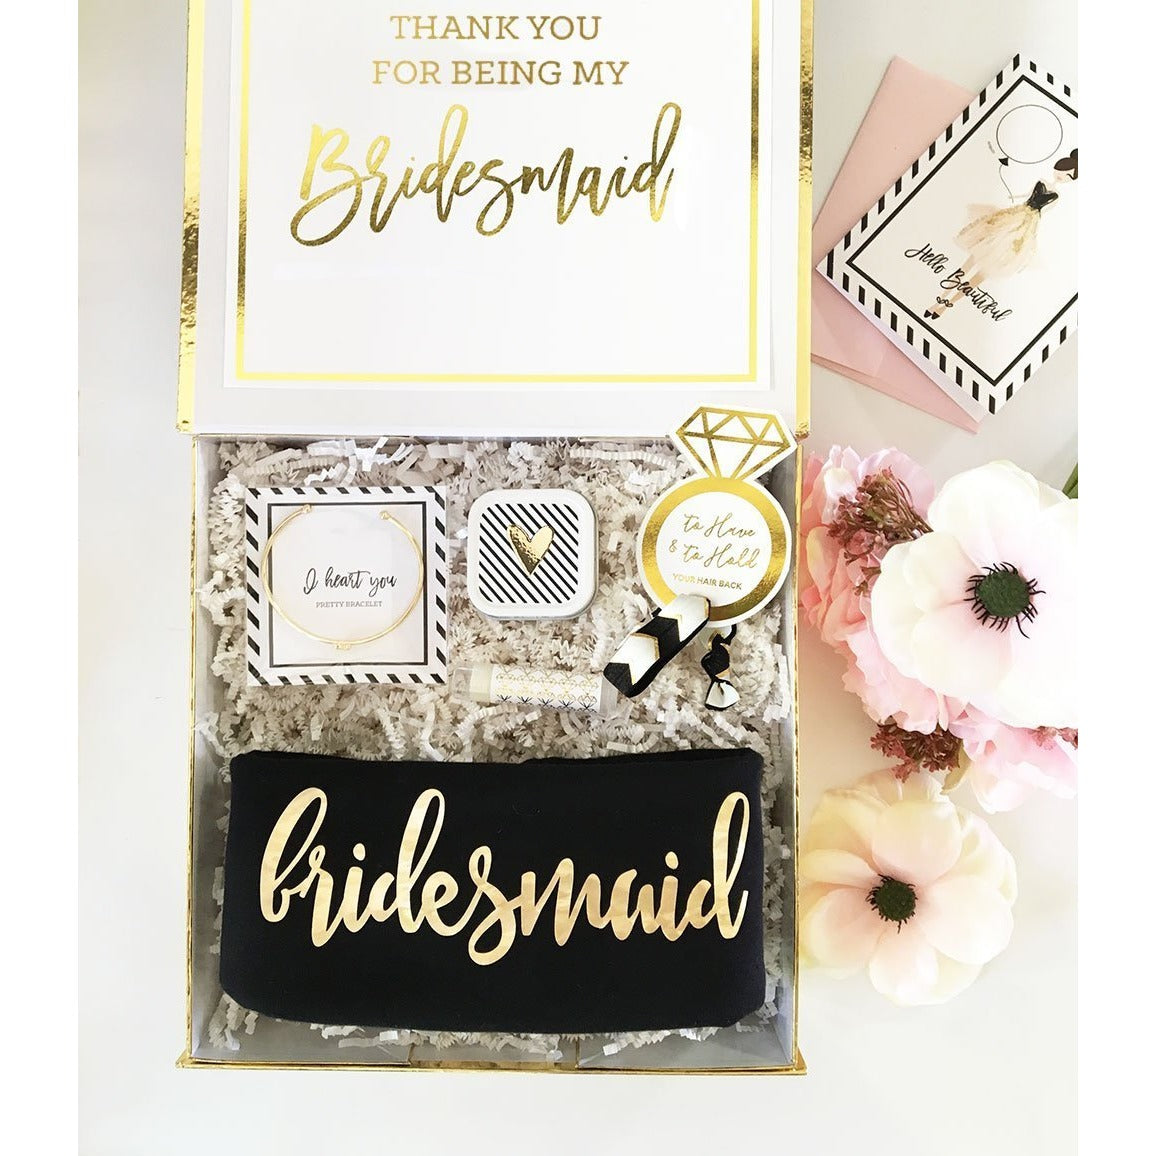 Special Bridesmaid Hamper - Between Boxes Gifts